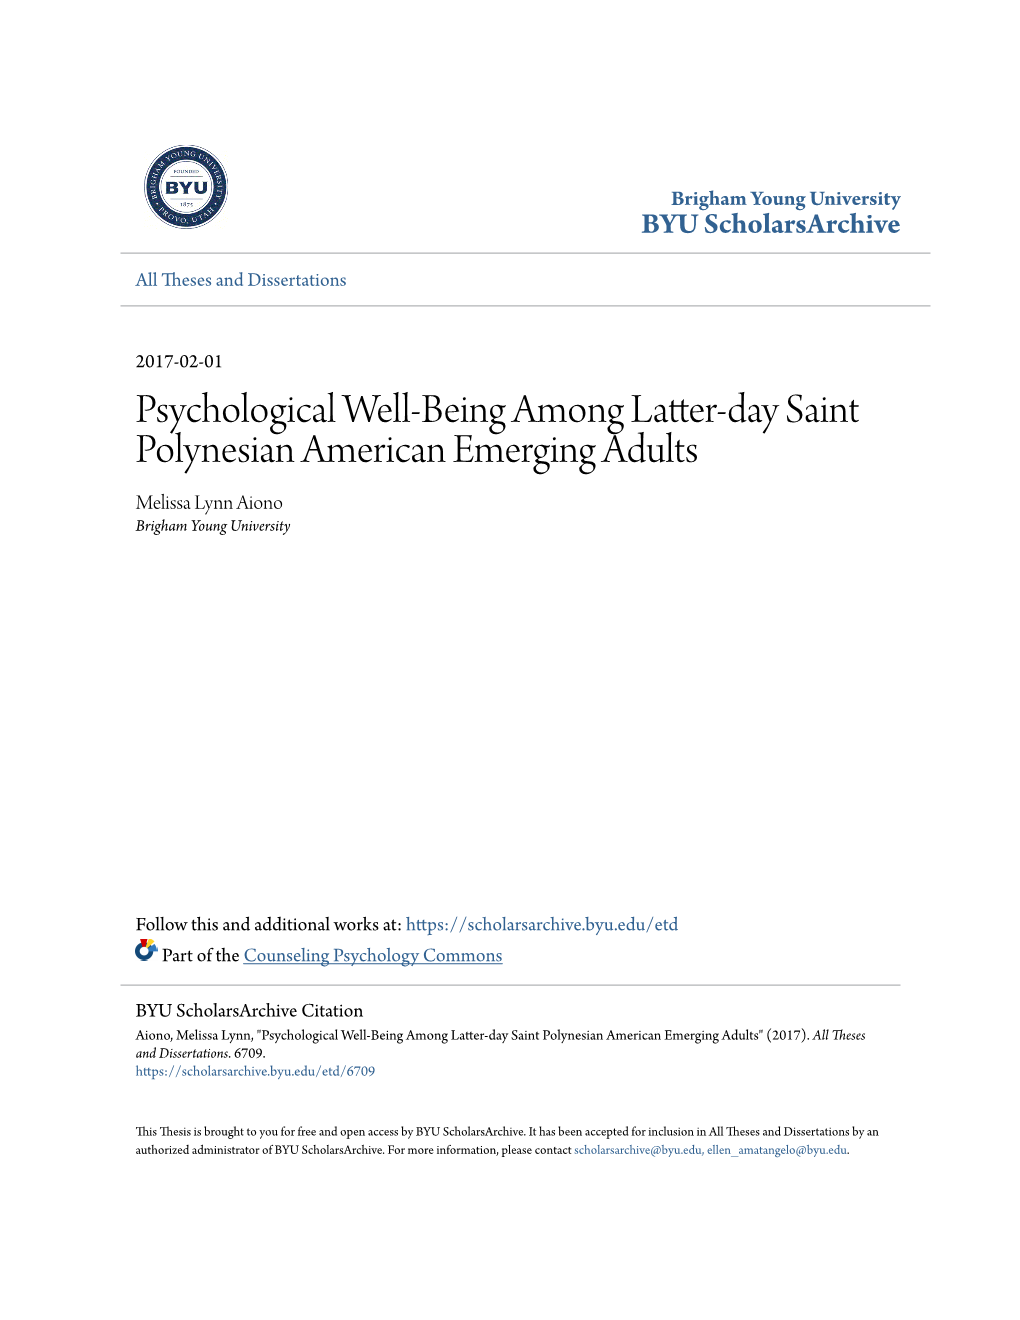 Psychological Well-Being Among Latter-Day Saint Polynesian American Emerging Adults Melissa Lynn Aiono Brigham Young University